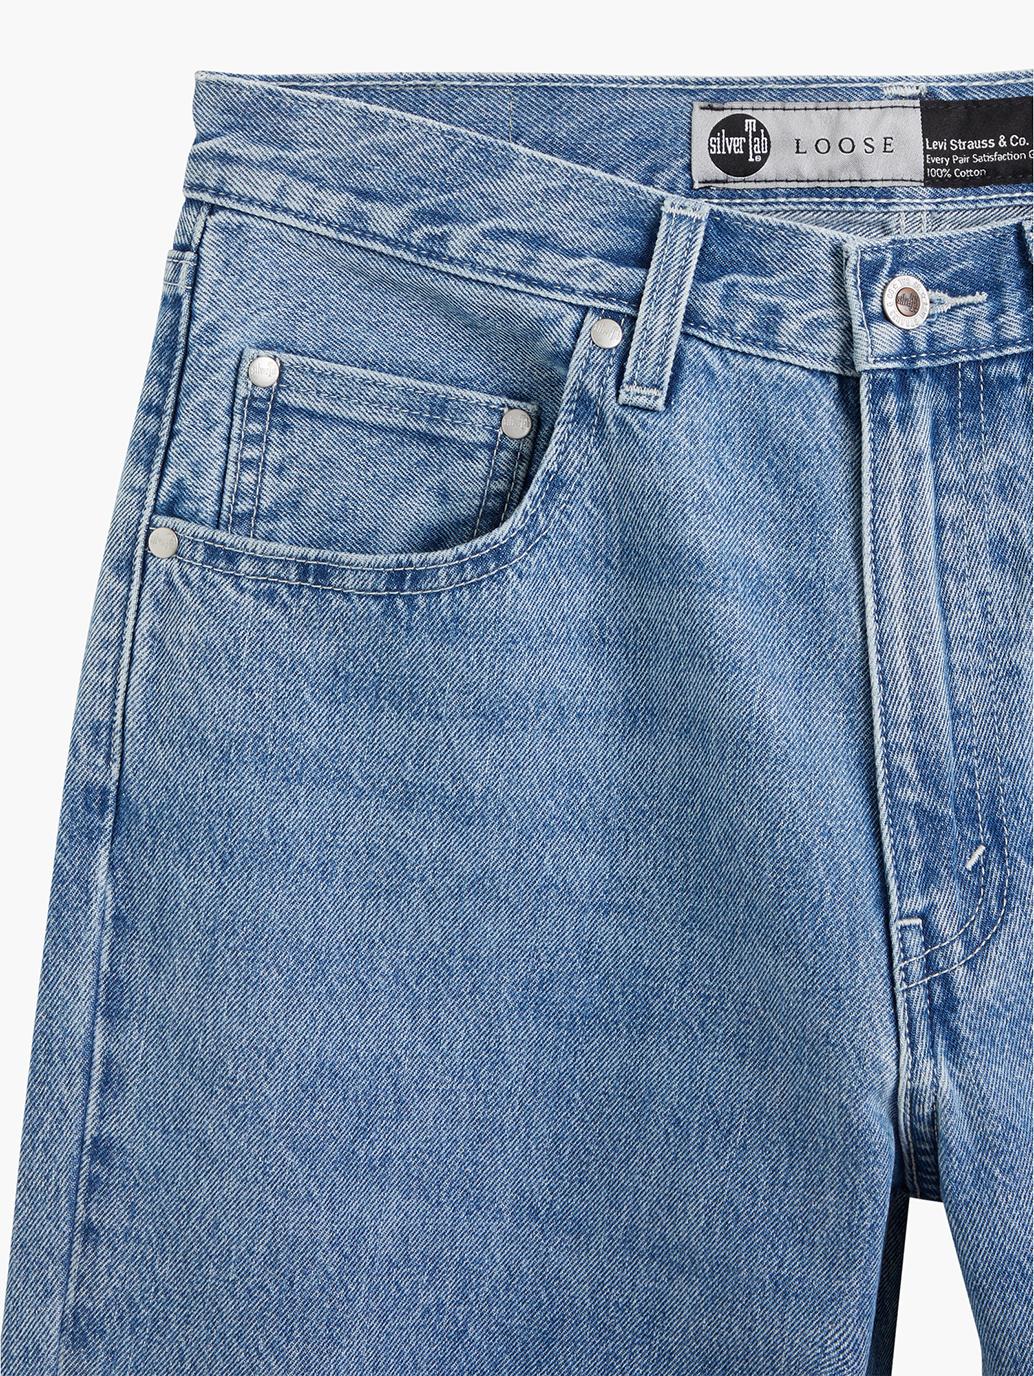 Buy Levi's® Men's SilverTab Loose | Levi’s® Official Online Store PH